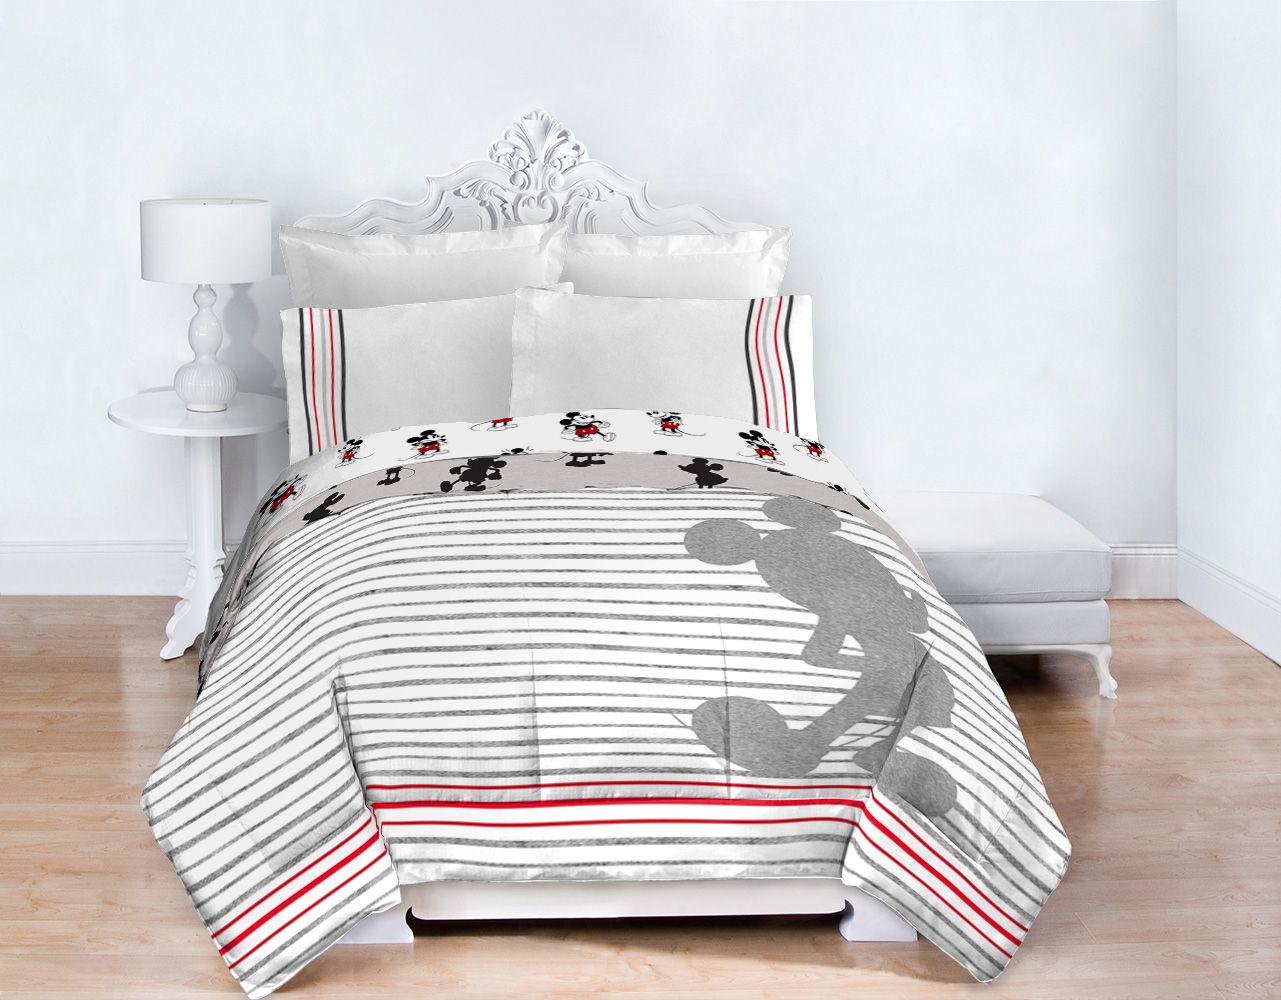 Mickey Mouse 90th Anniversary Striped Bed in a Bag Bedding Set w/ Reversible Comforter - image 1 of 5